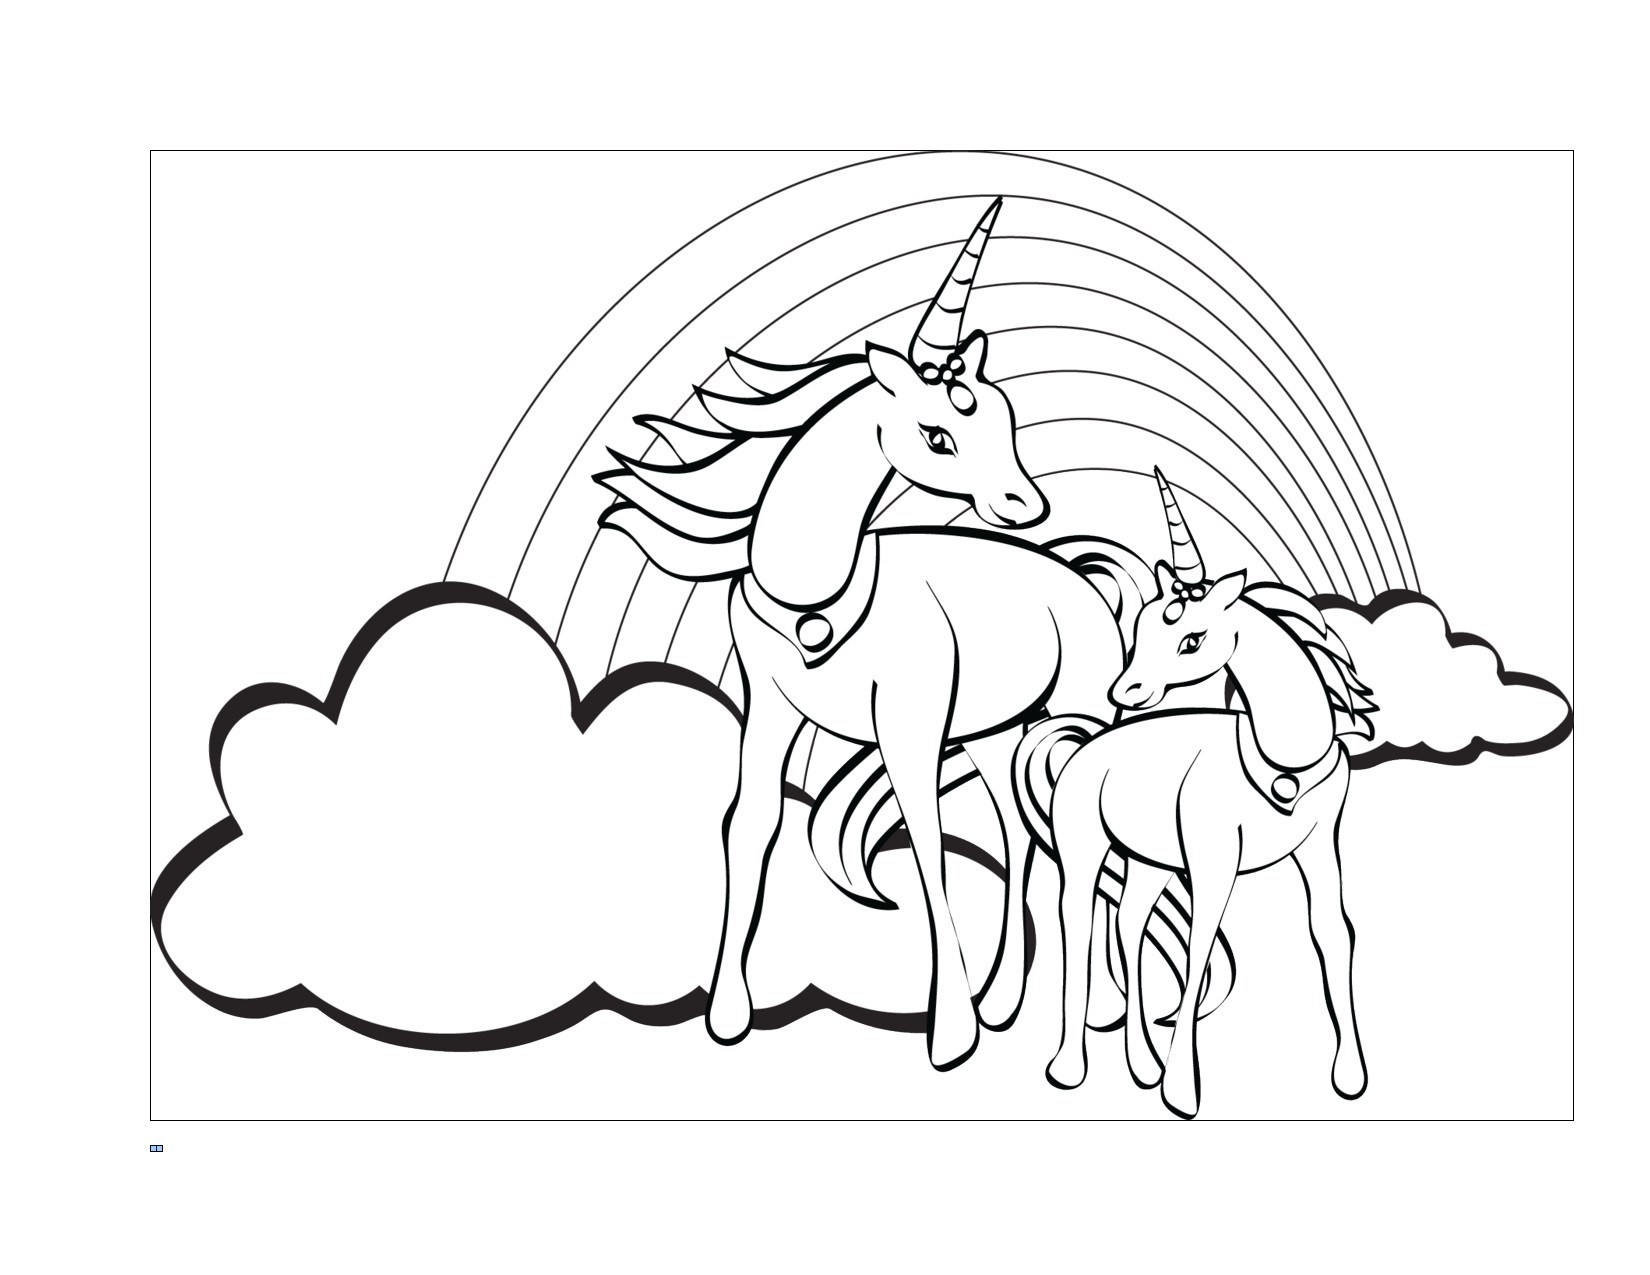 Unicorn with Wings Coloring Pages - BubaKids.com